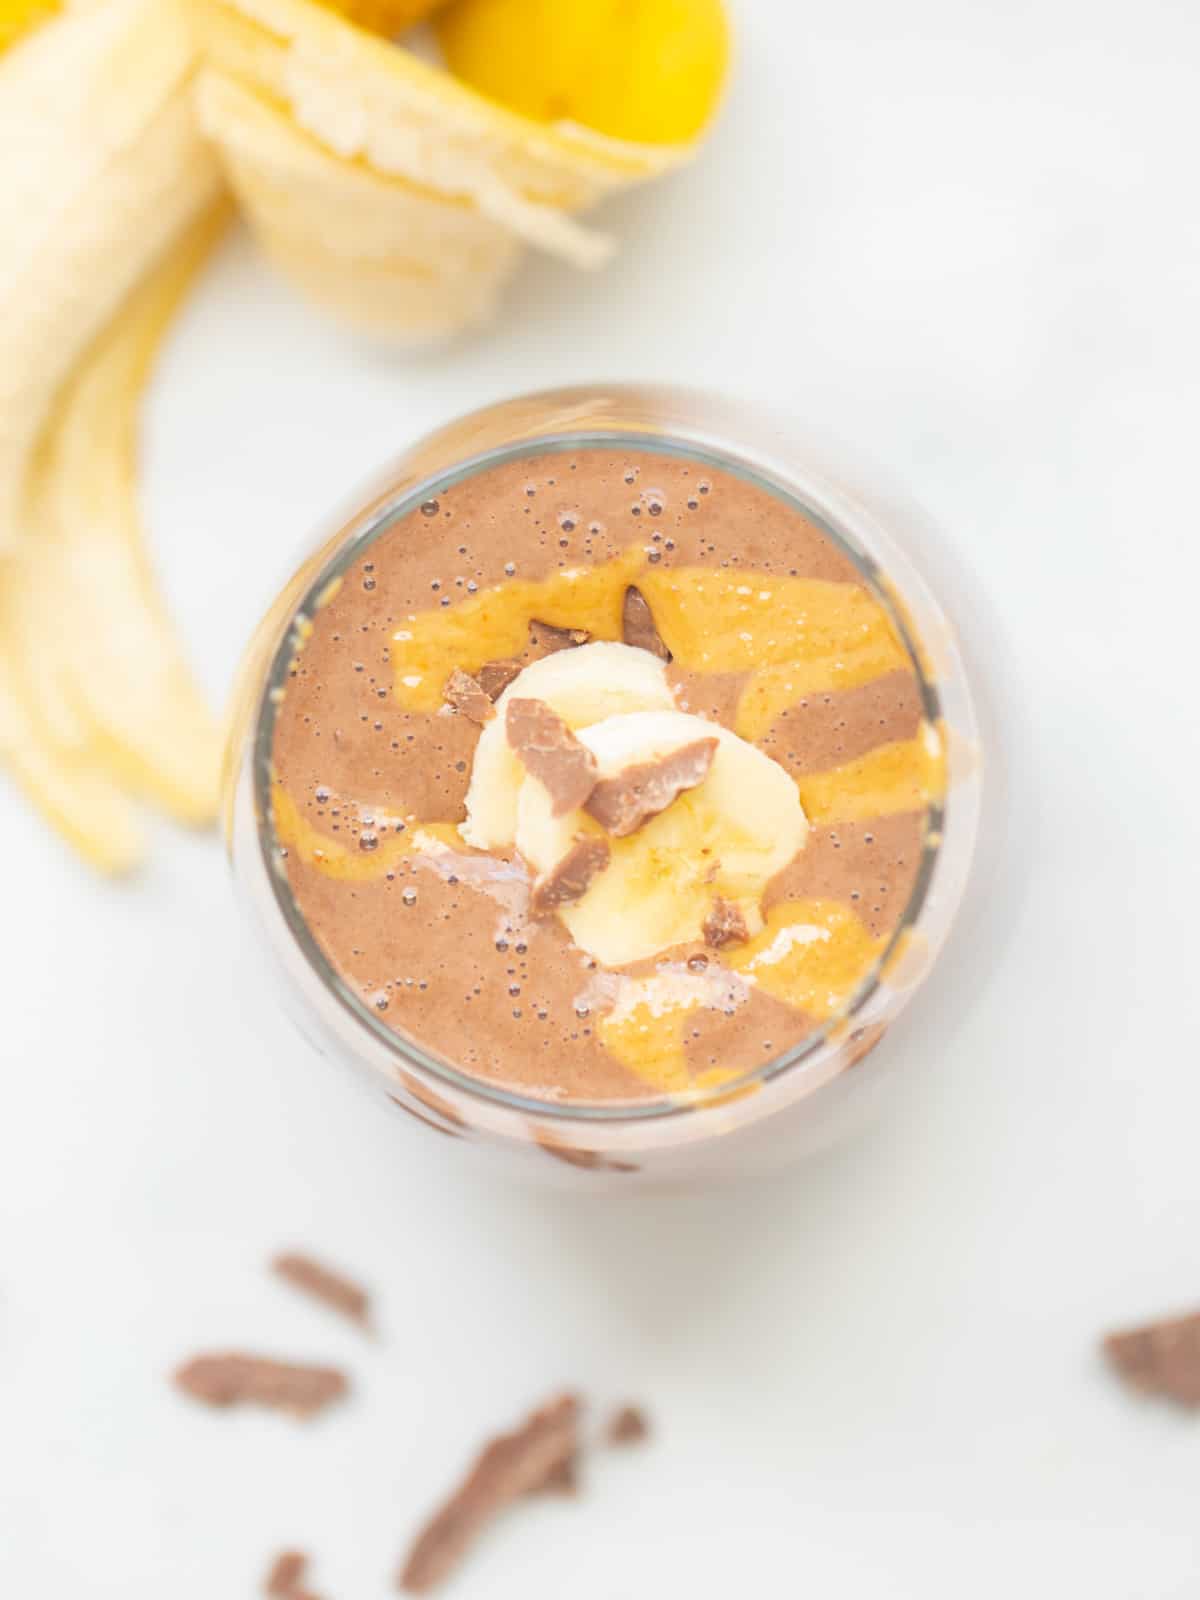 Top down view of chocolate peanut butter smoothie in glass topped with peanut butter, chocolate, and sliced banana.